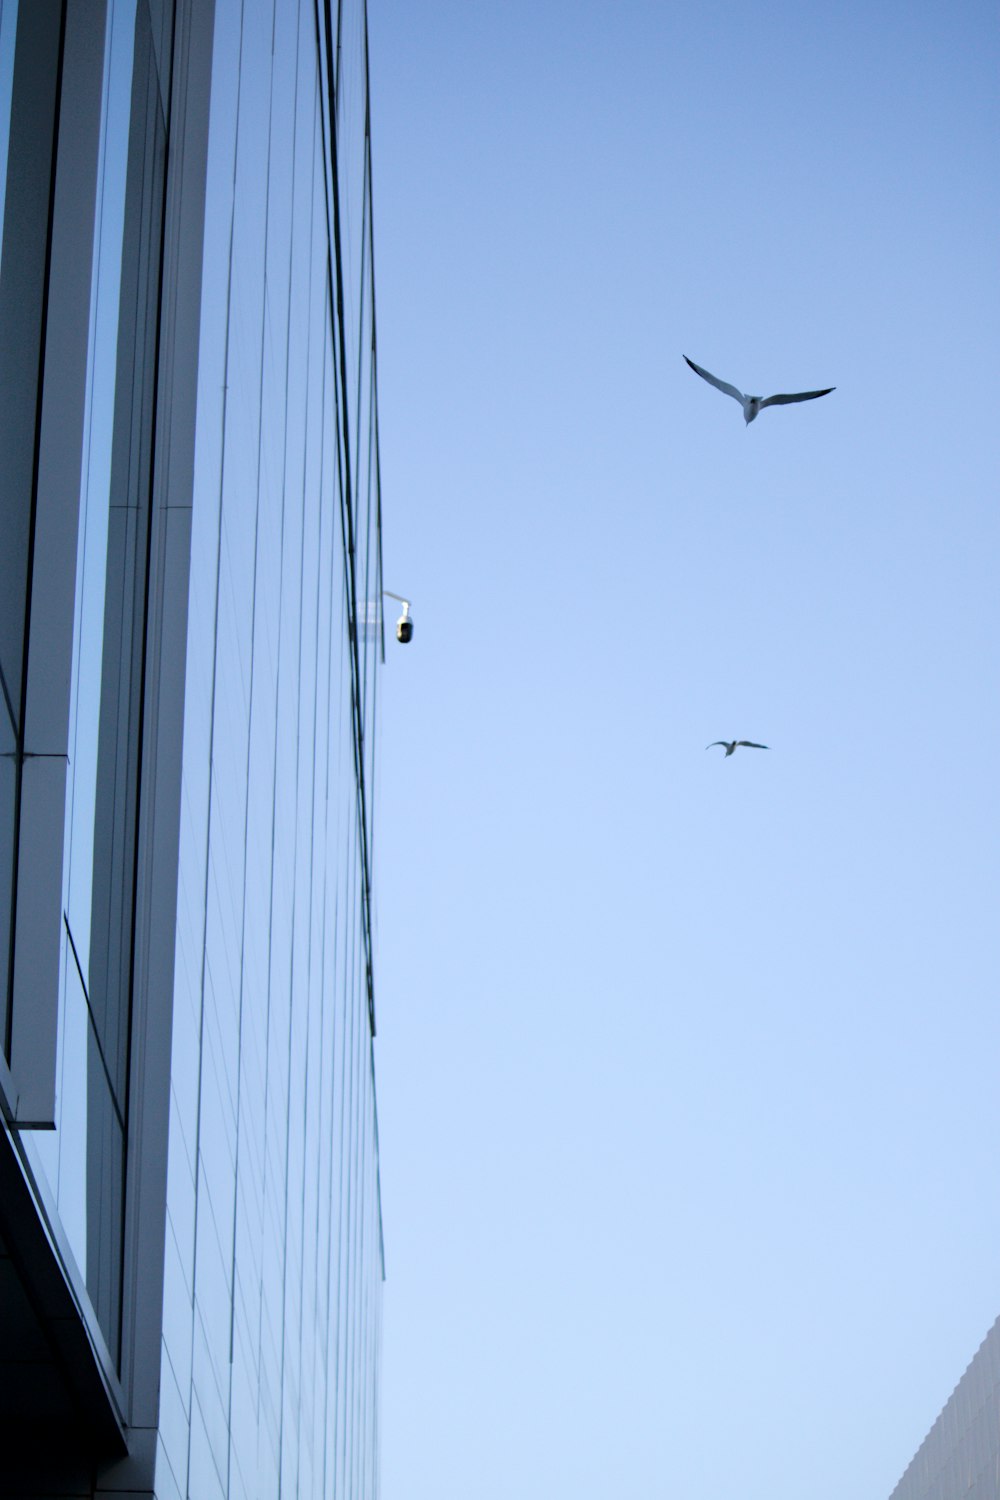 two birds flying in the air near a building